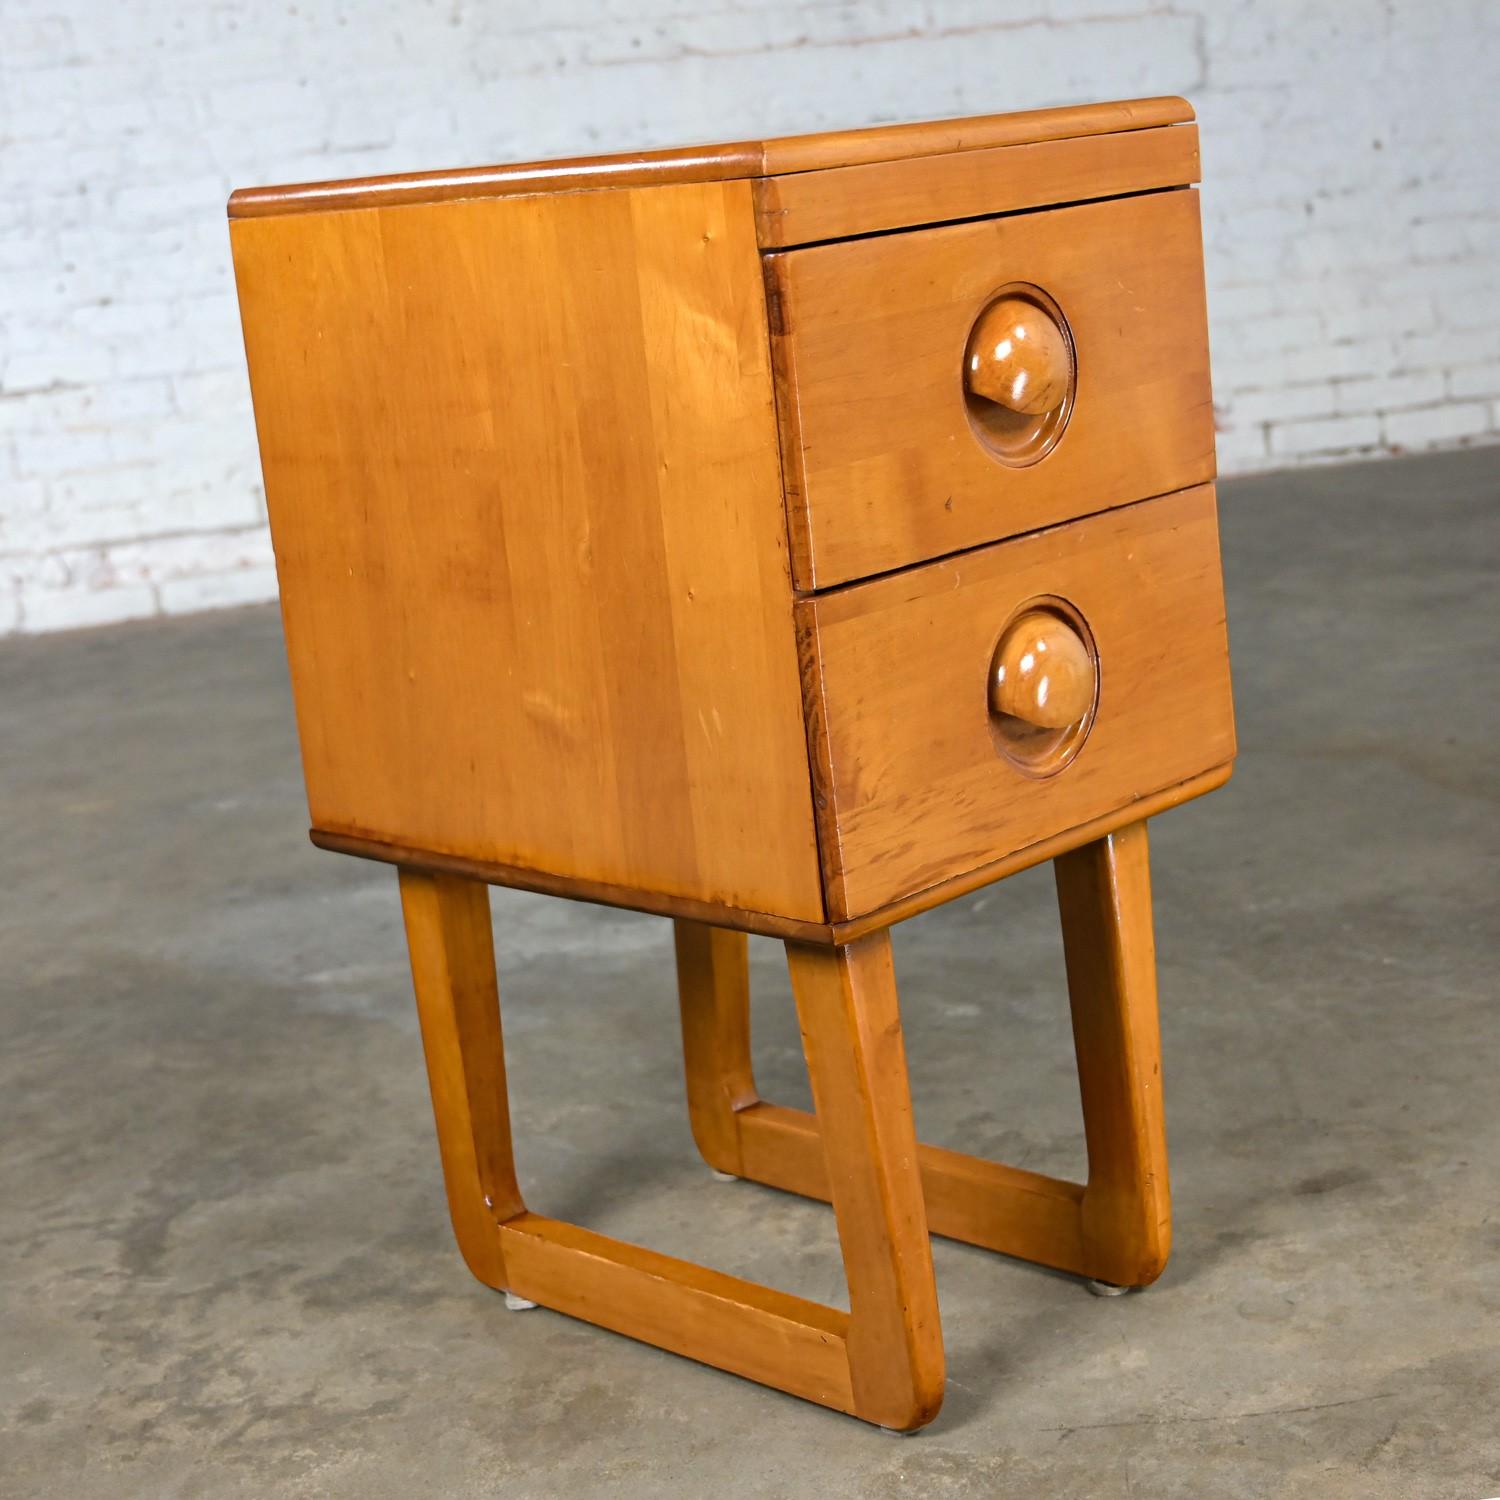 Early to Mid-20th Century Art Moderne Maple 2 Drawer Nightstand Style of Bissman In Good Condition For Sale In Topeka, KS